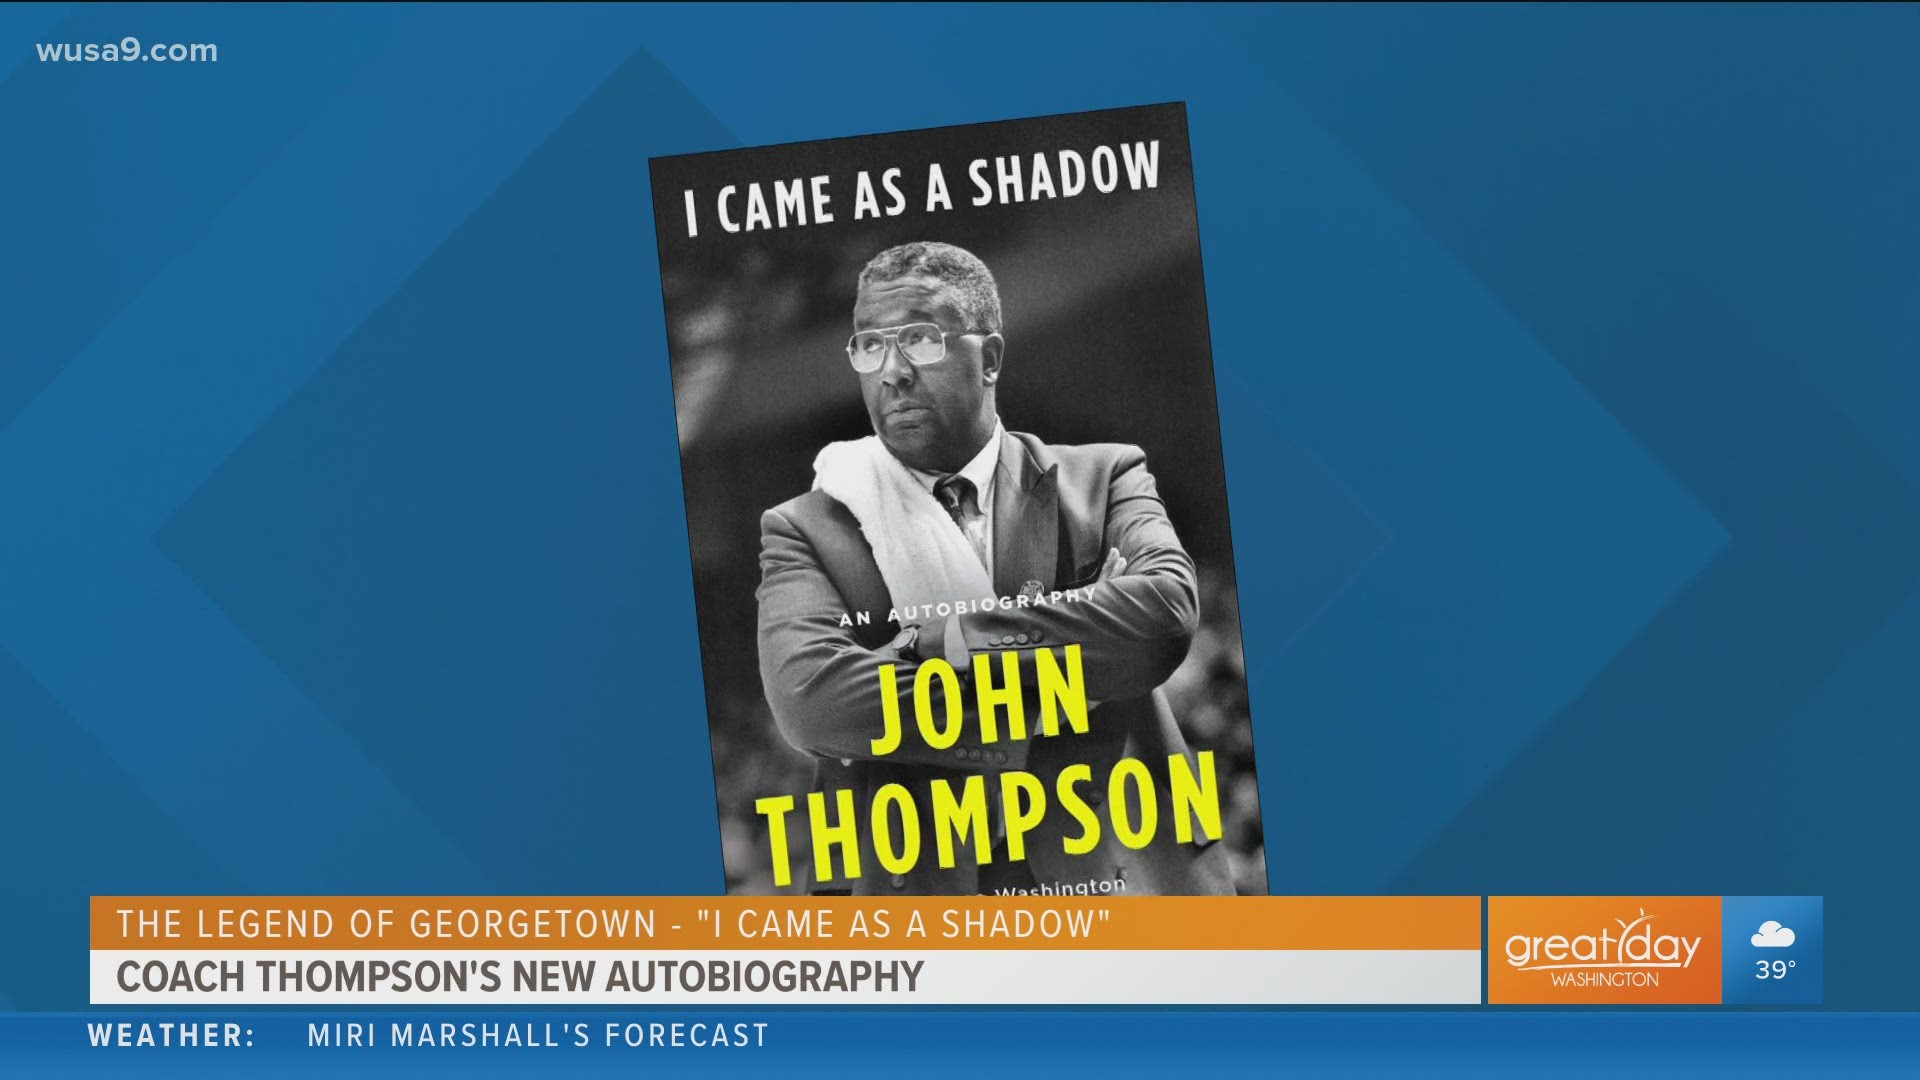 Co-author of Coach John Thompson's autobiography, Jesse Washington shares his experience writing with the legendary coach.